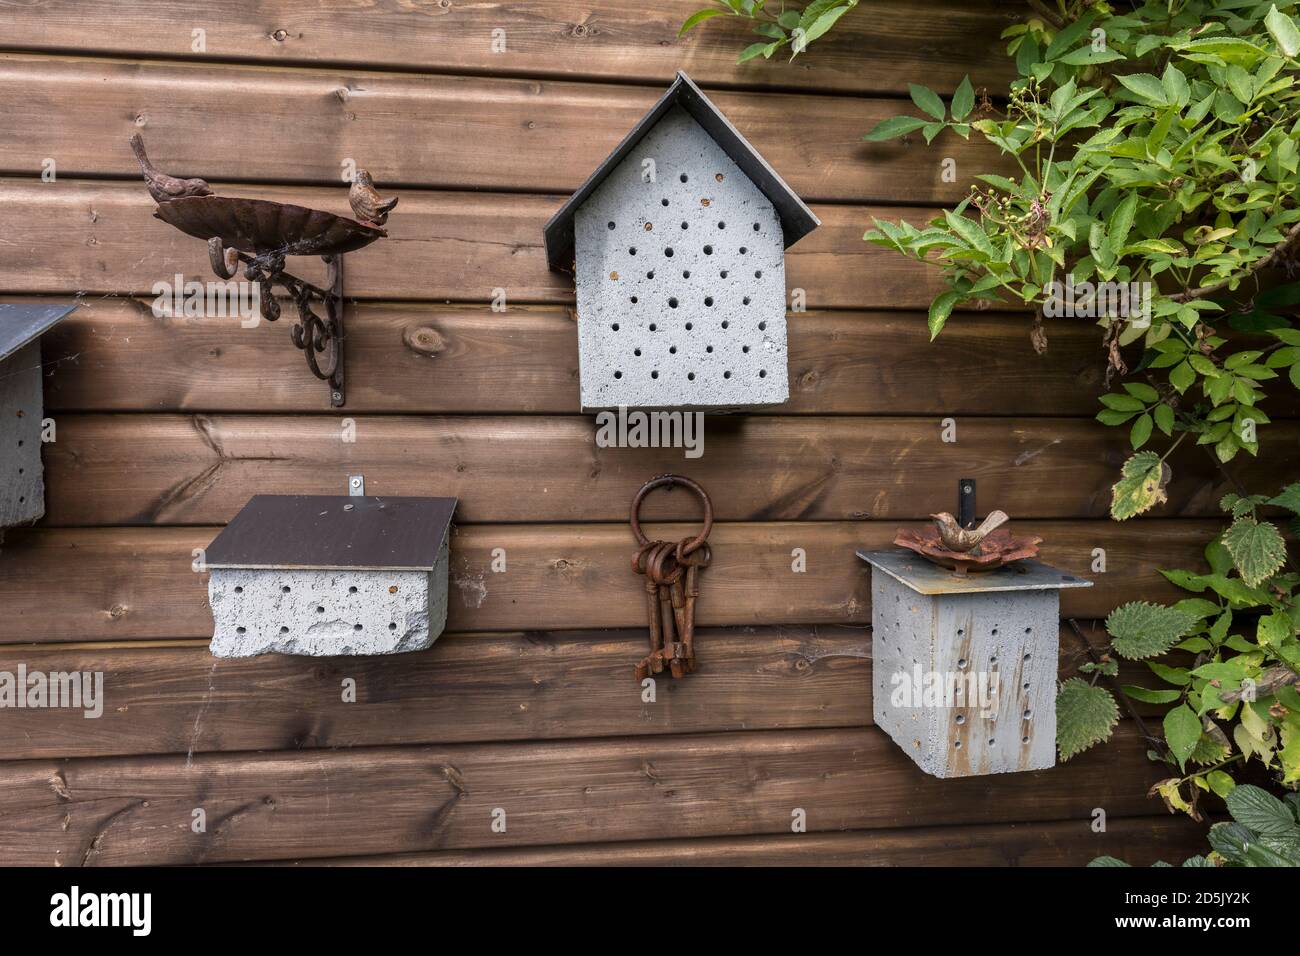 Insect Houses; with Garden Ornaments; UK Stock Photo